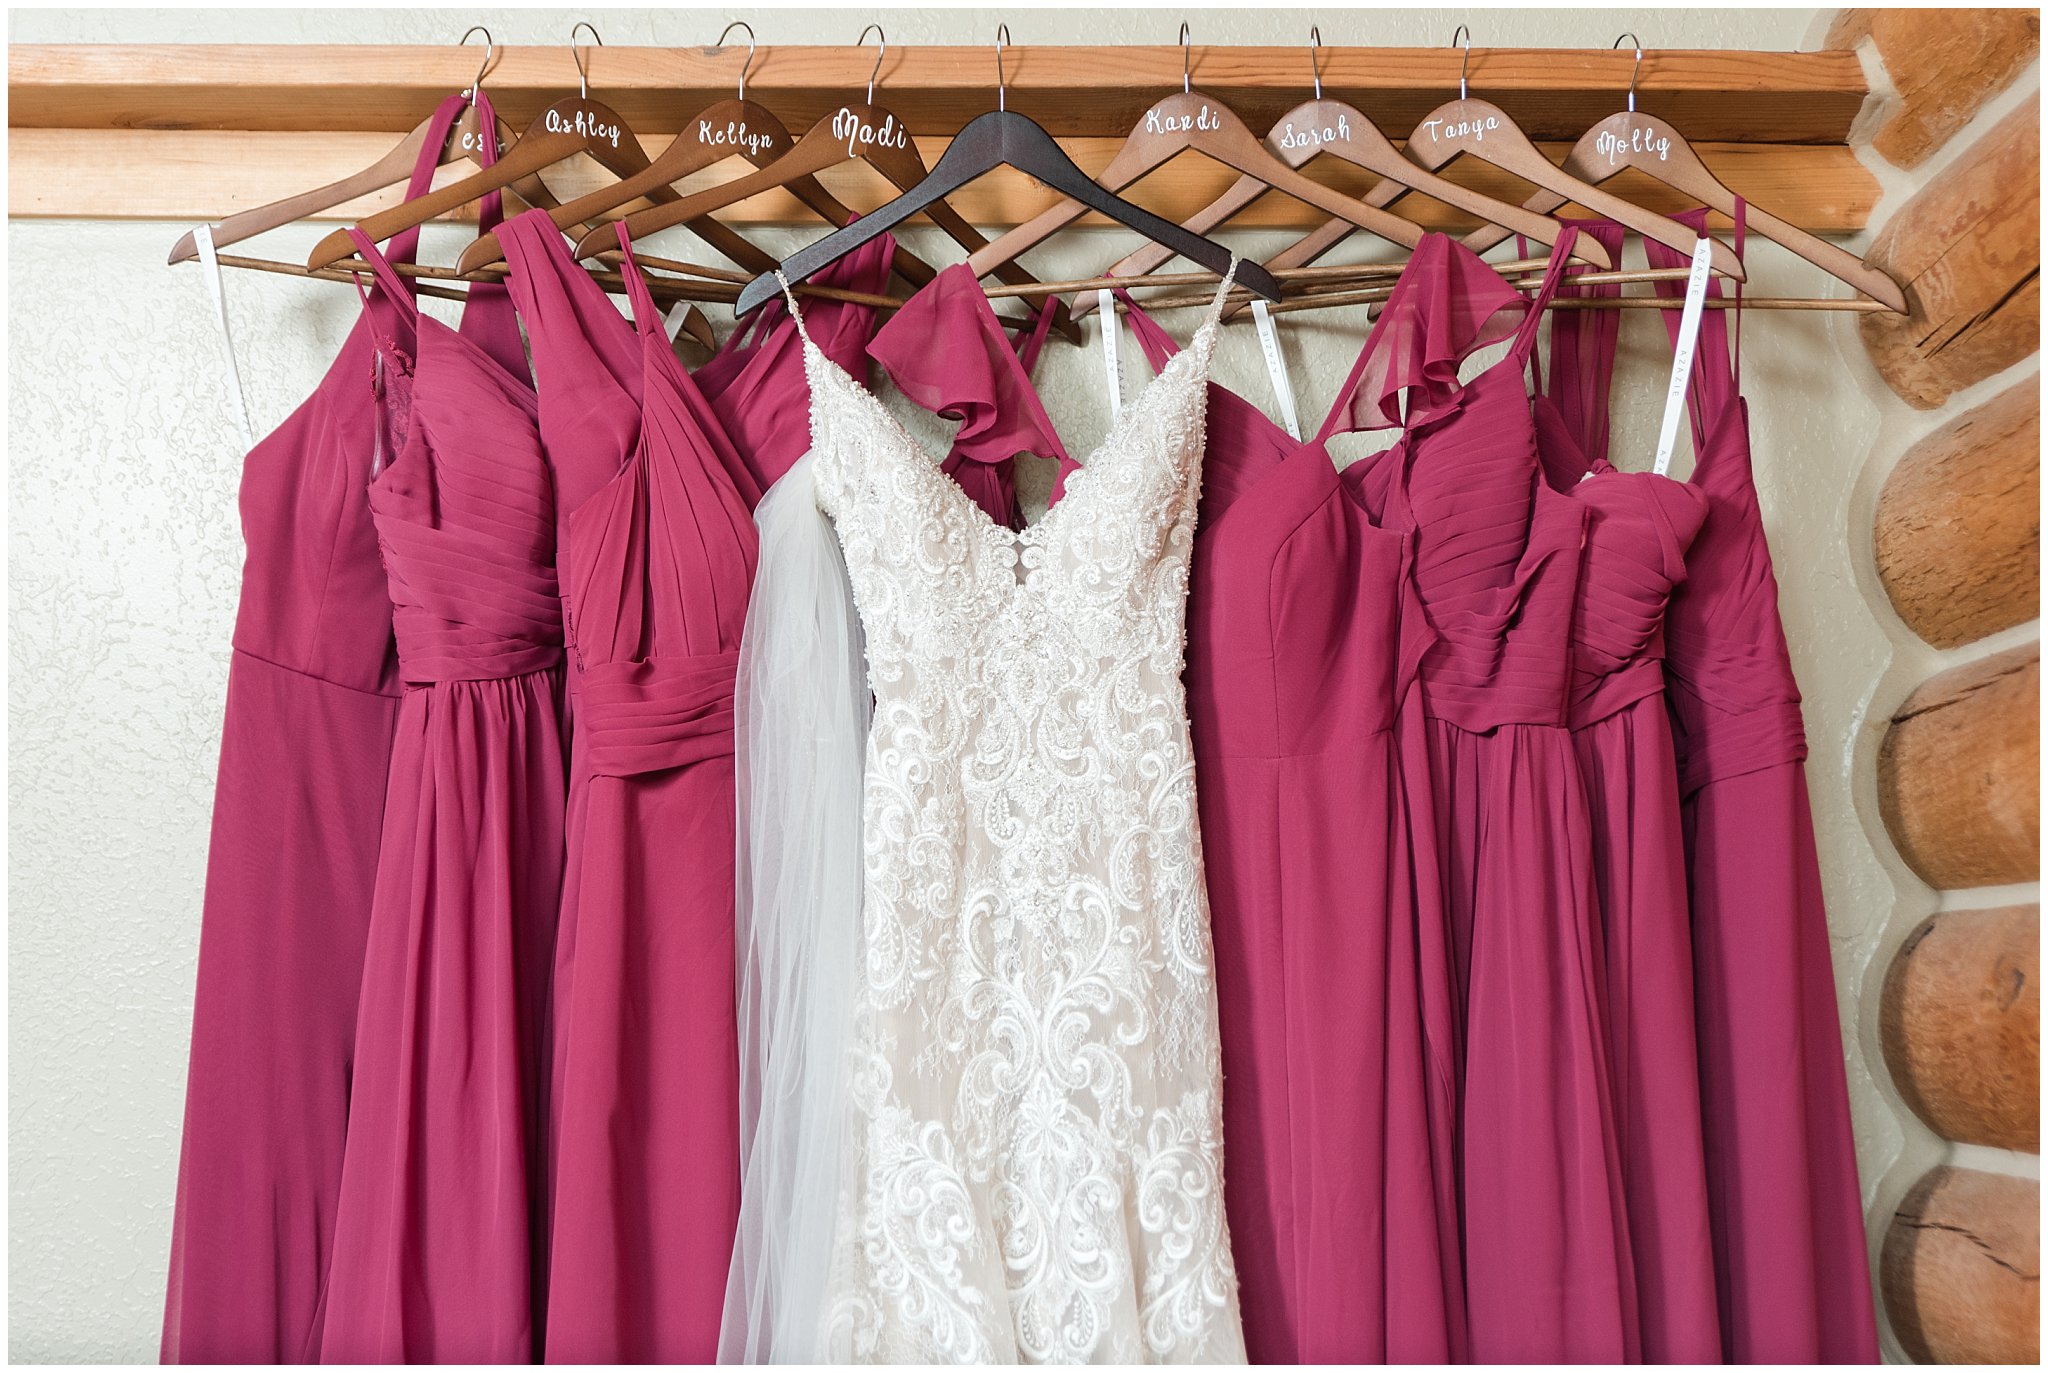 Wedding dress and bridesmaid dresses with bridal details | Dusty Blue and Rose Summer Wedding at Oak Hills Utah | Jessie and Dallin Photography